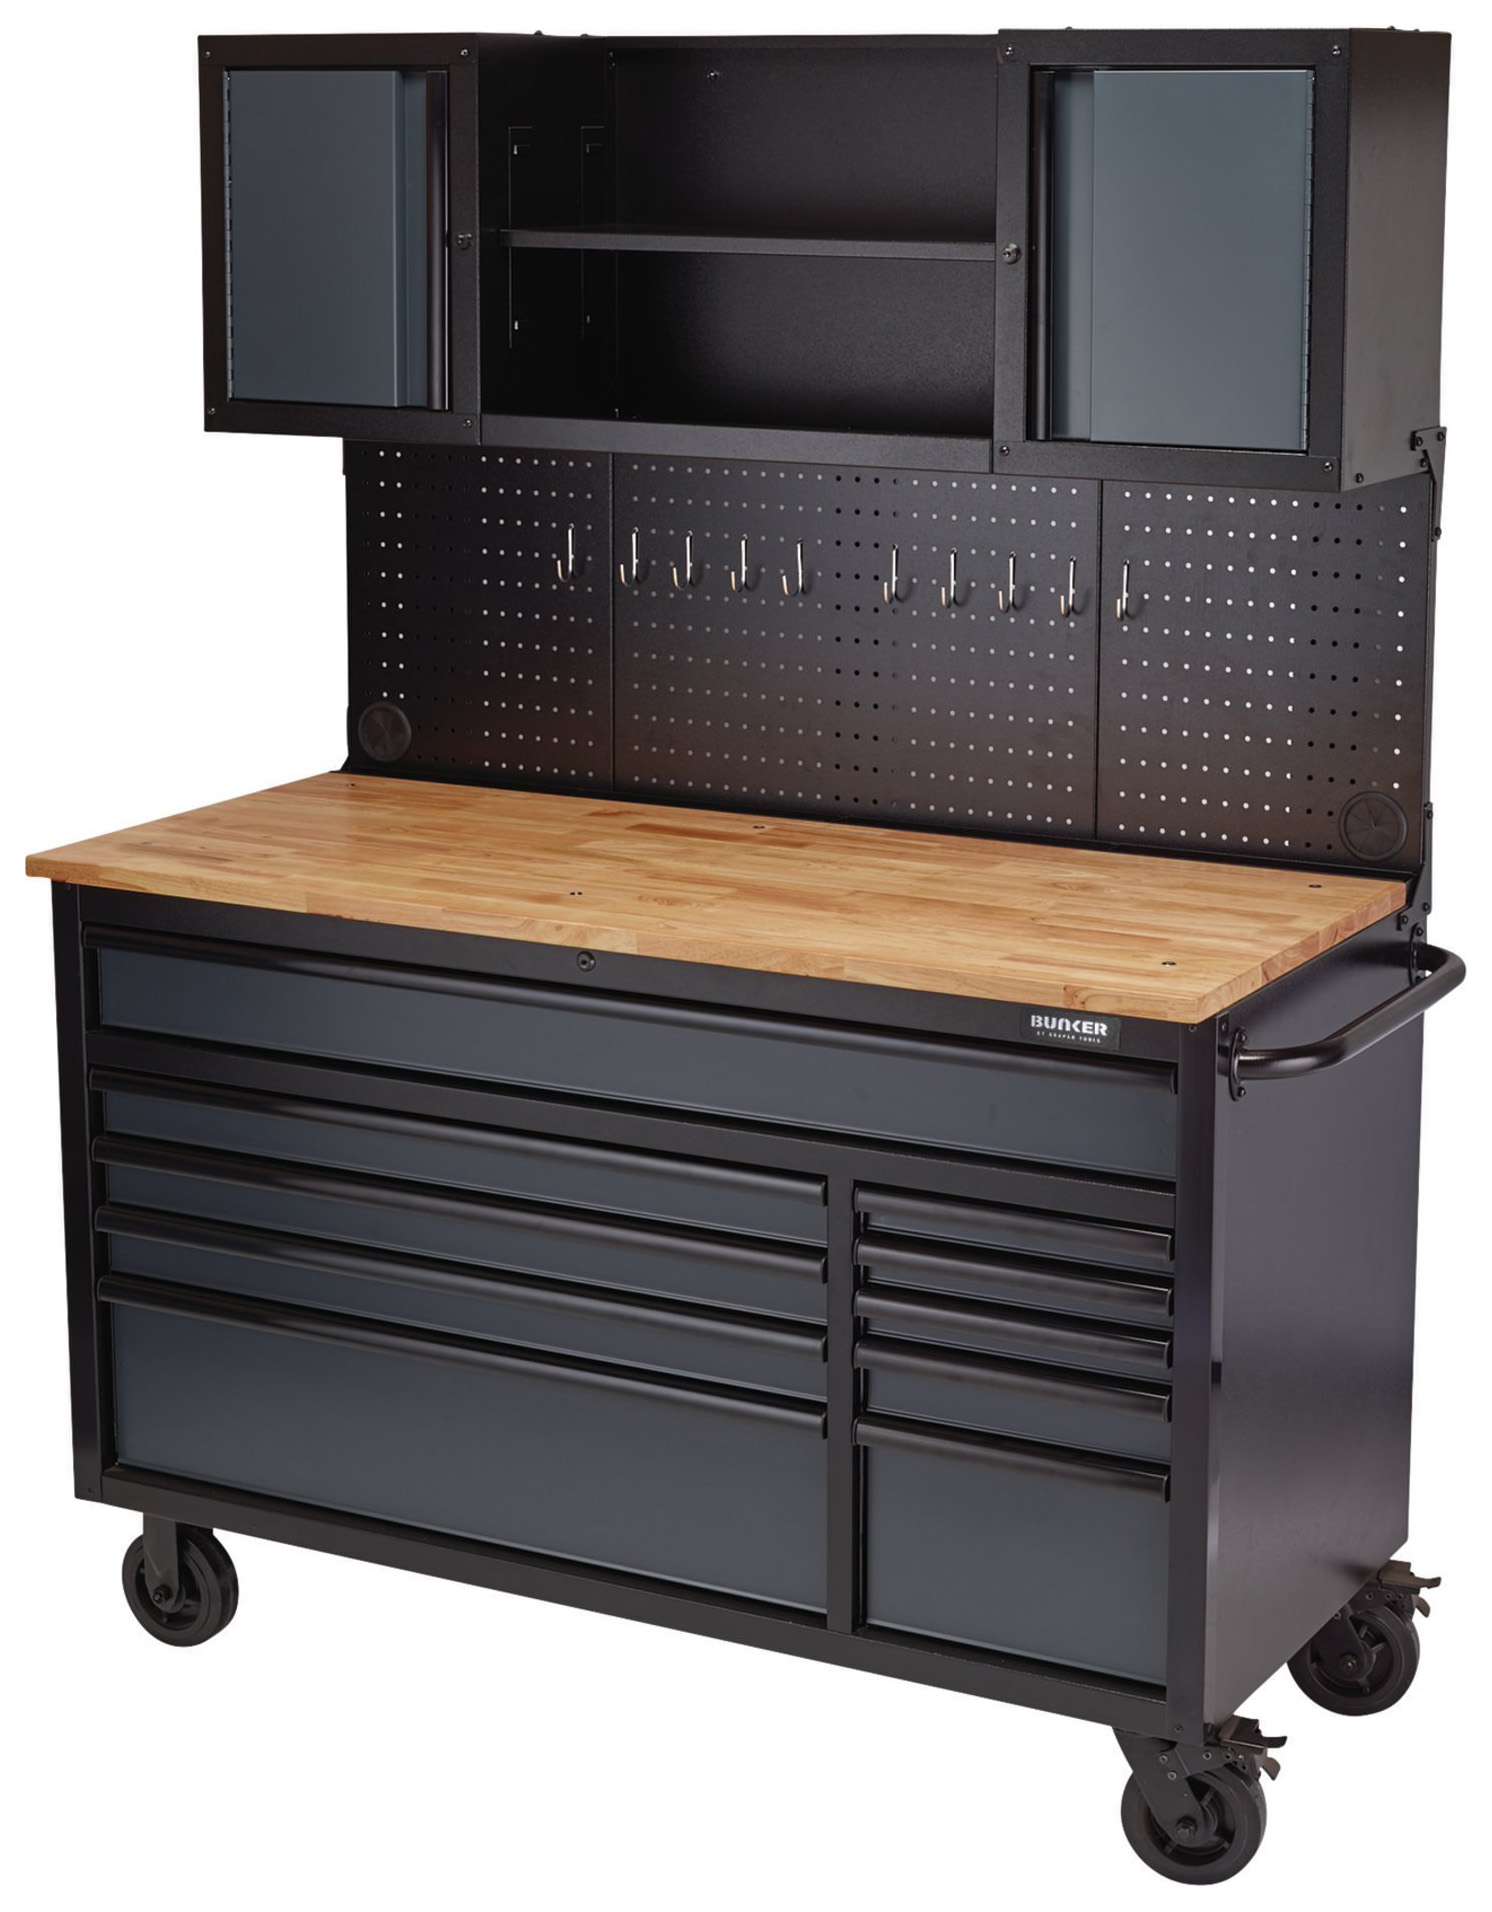 BUNKER Grey 10 Drawer Roller Workstation with Workbench - 56in